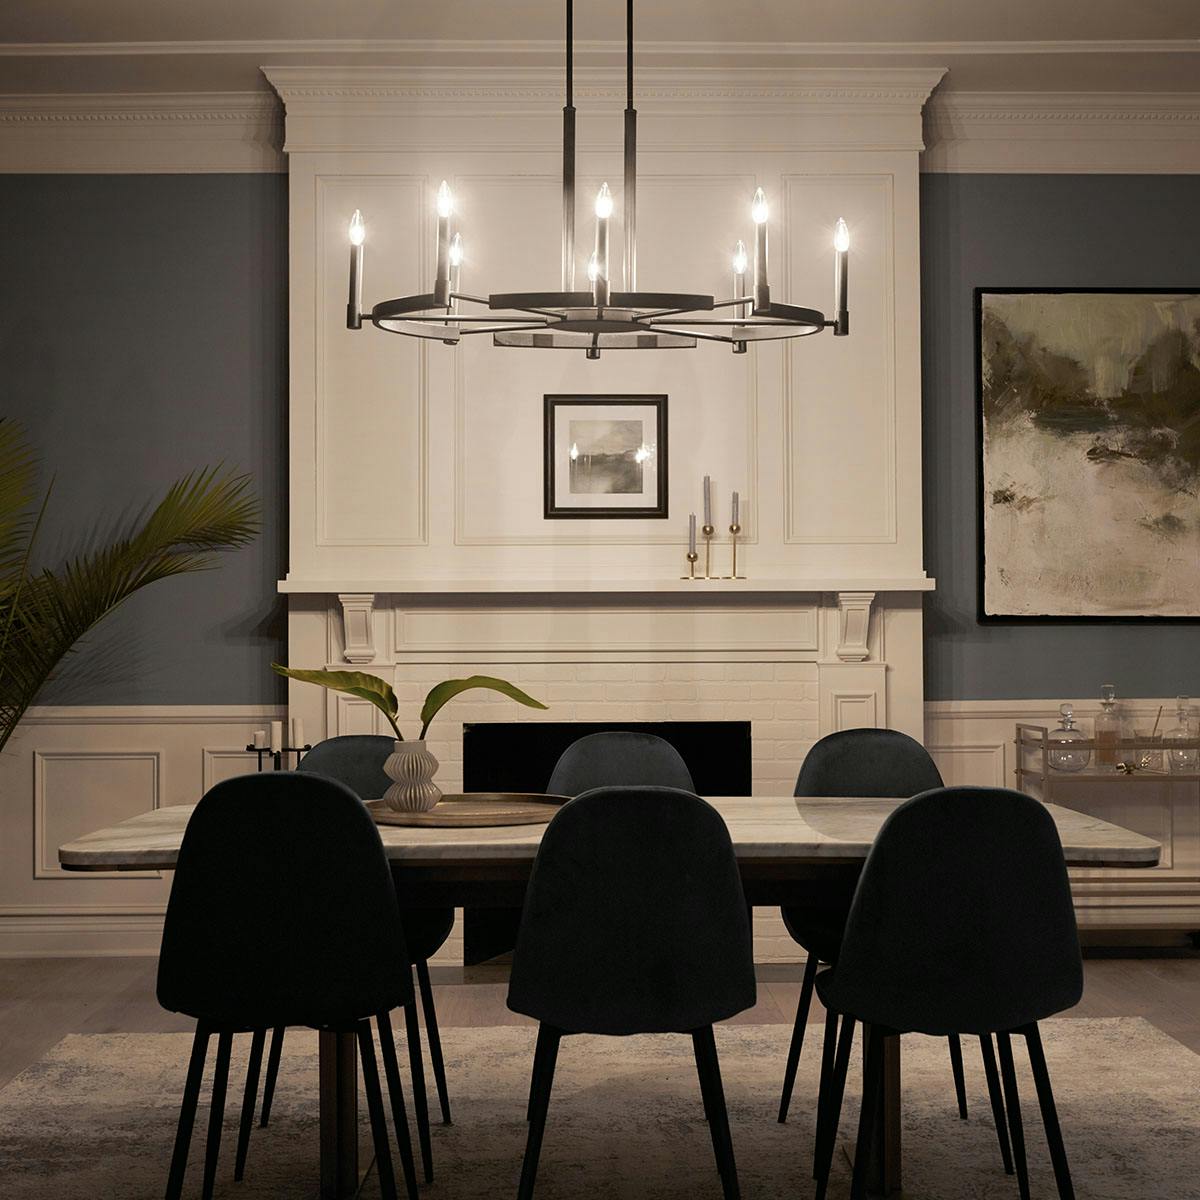 Night time Dining Room image featuring Tolani chandelier 52429BK